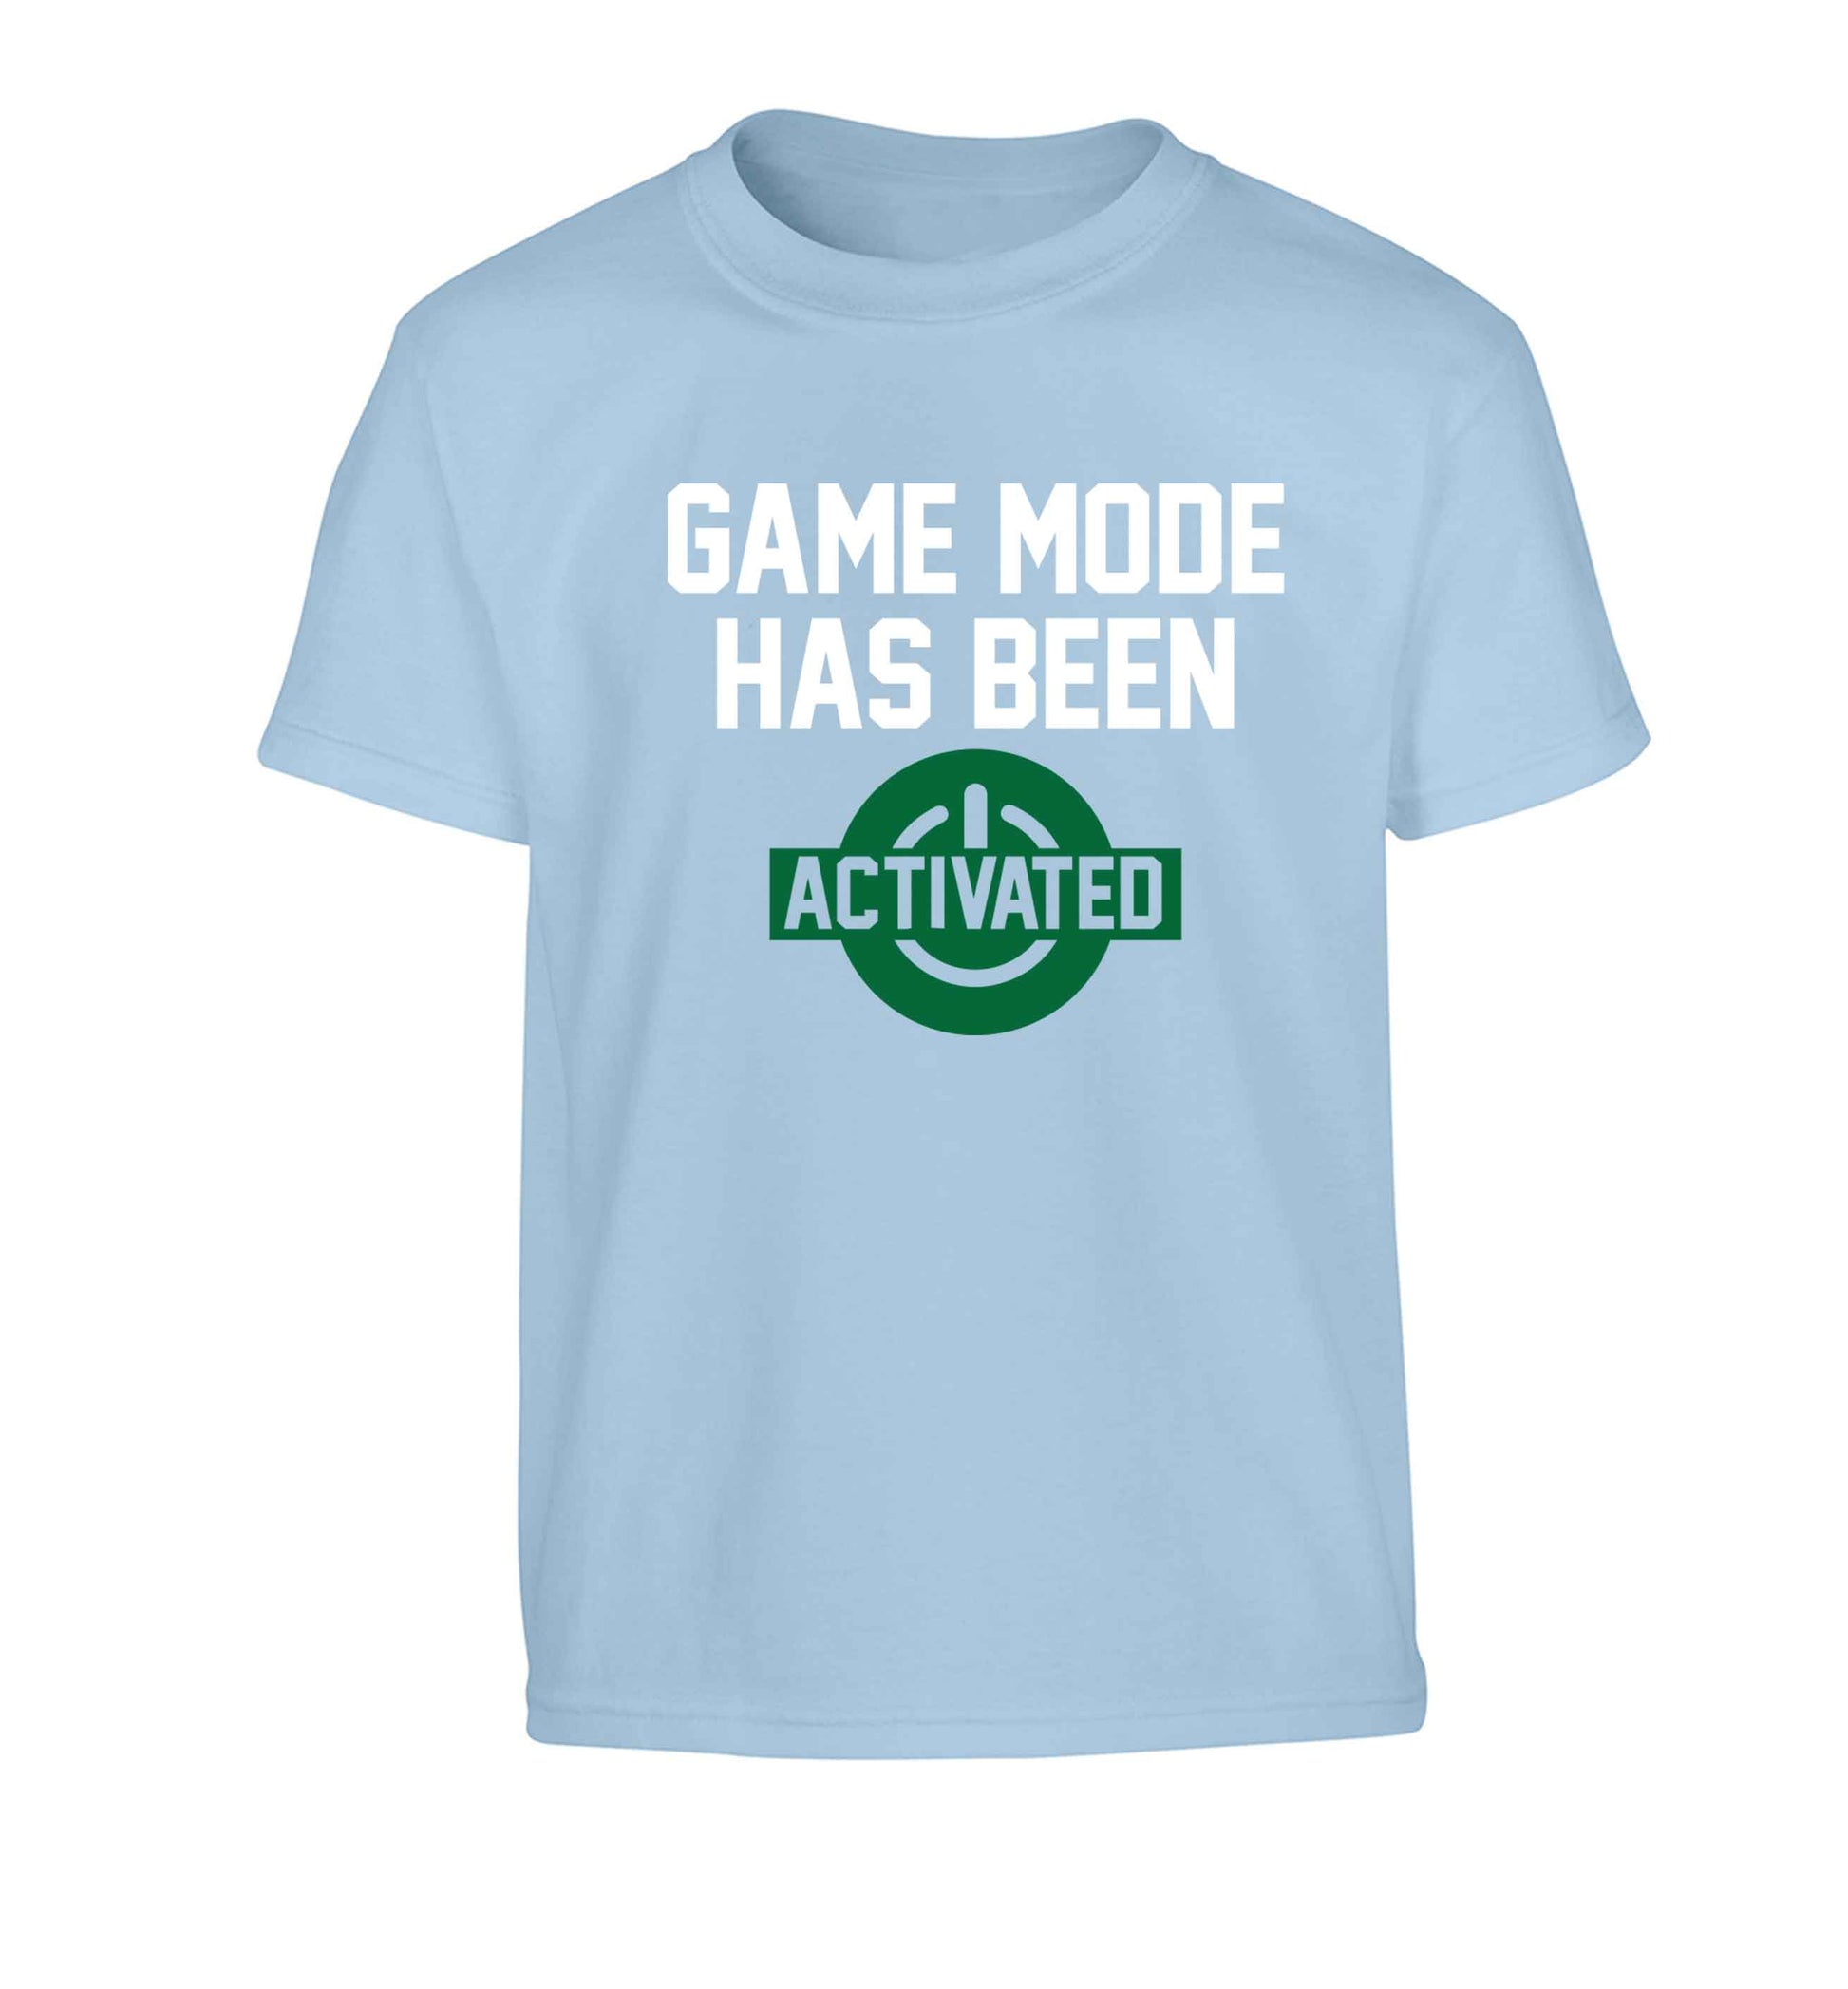 Game mode has been activated Children's light blue Tshirt 12-13 Years